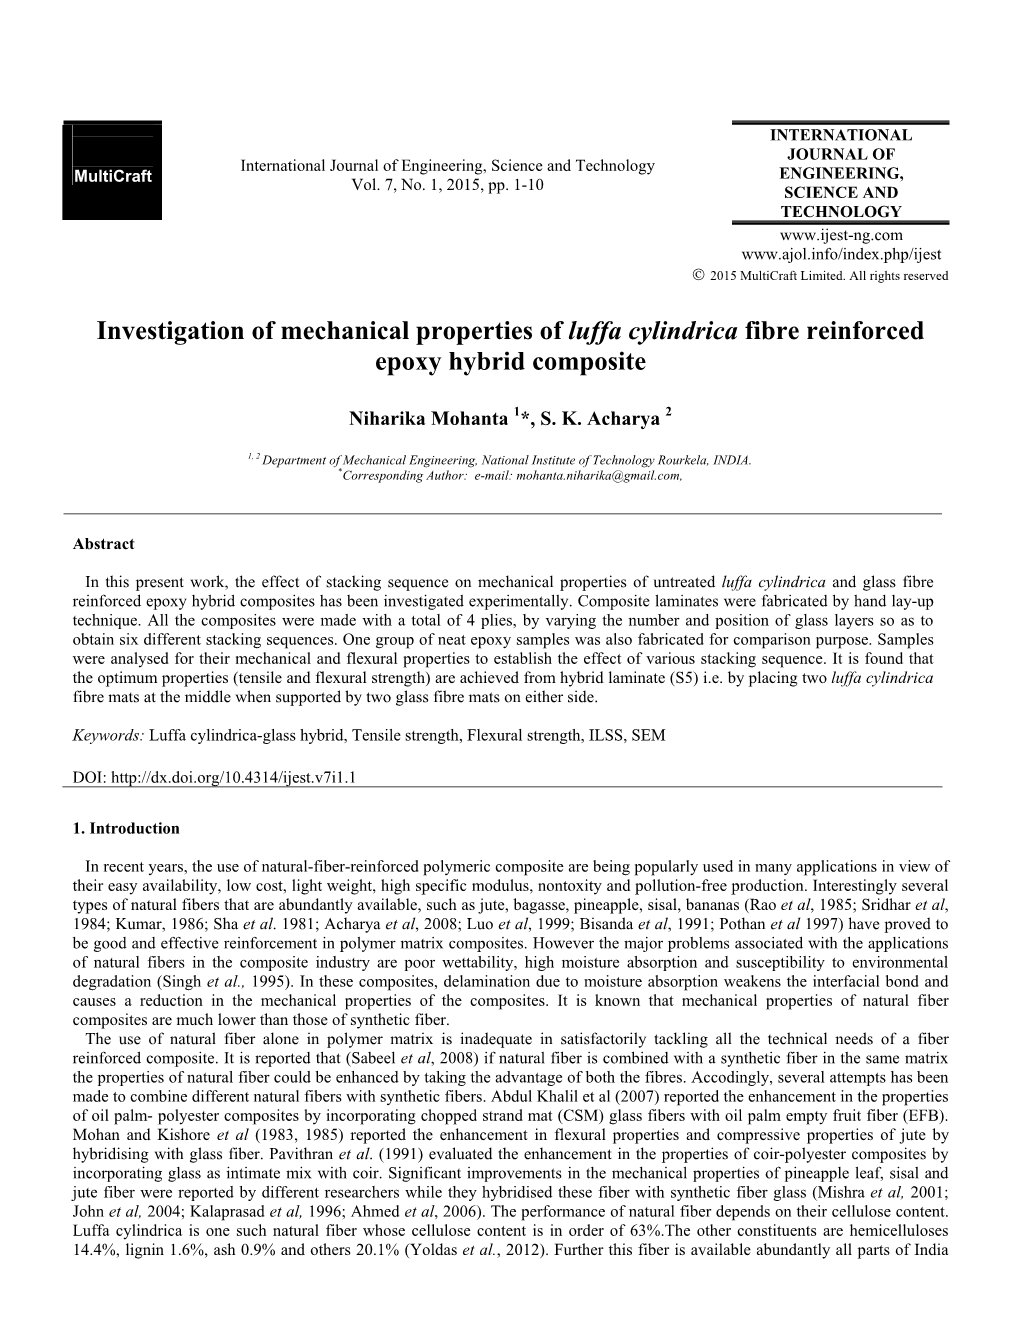 Investigation of Mechanical Properties of Luffa Cylindrica Fibre Reinforced Epoxy Hybrid Composite